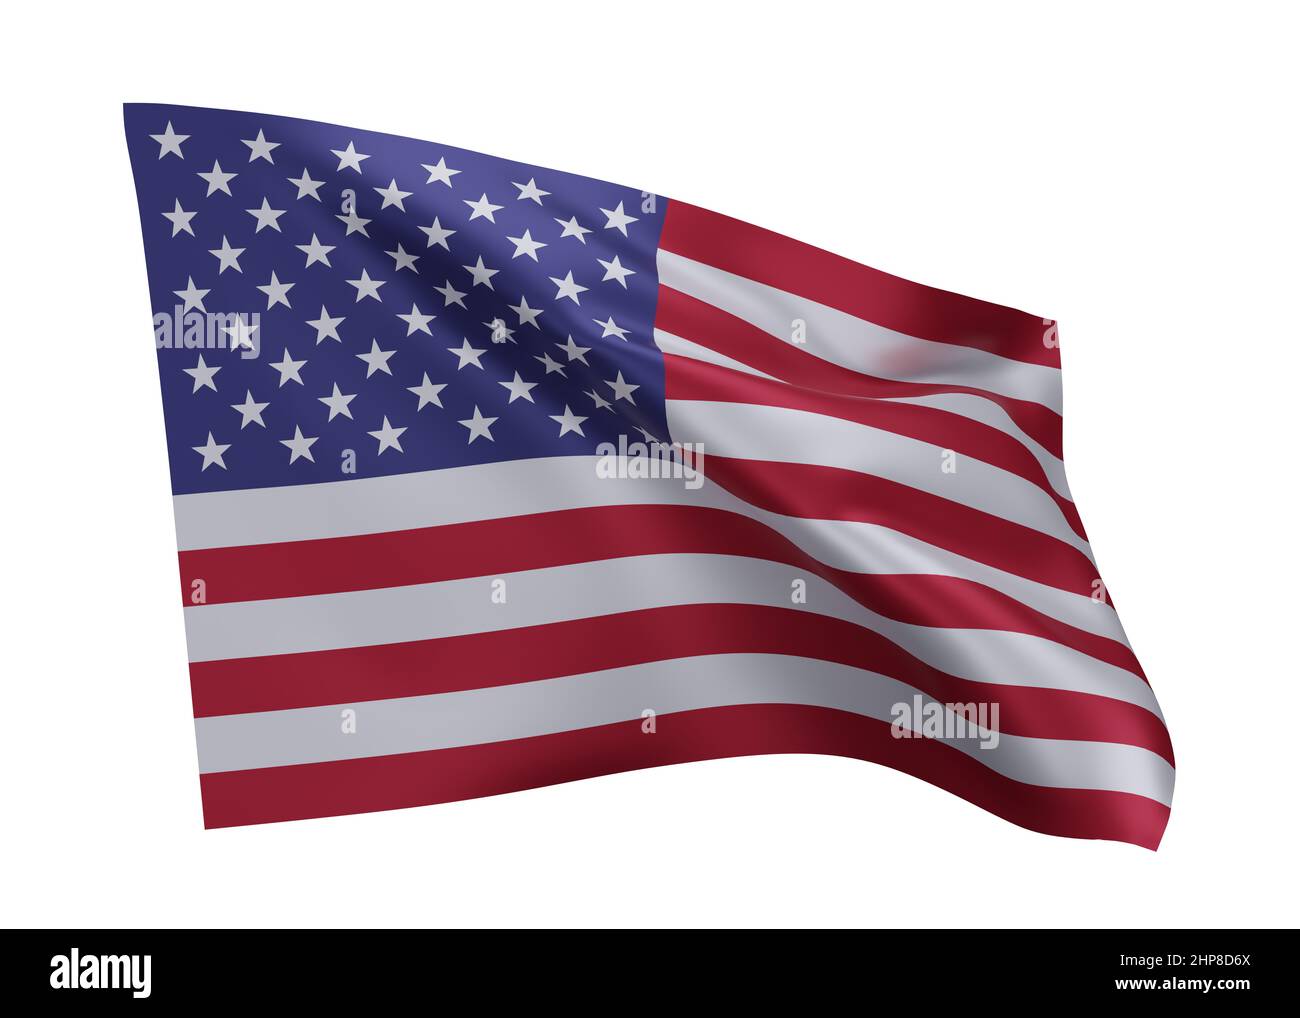 3d illustration flag of USA. United states high resolution flag isolated against white background. 3d rendering Stock Photo